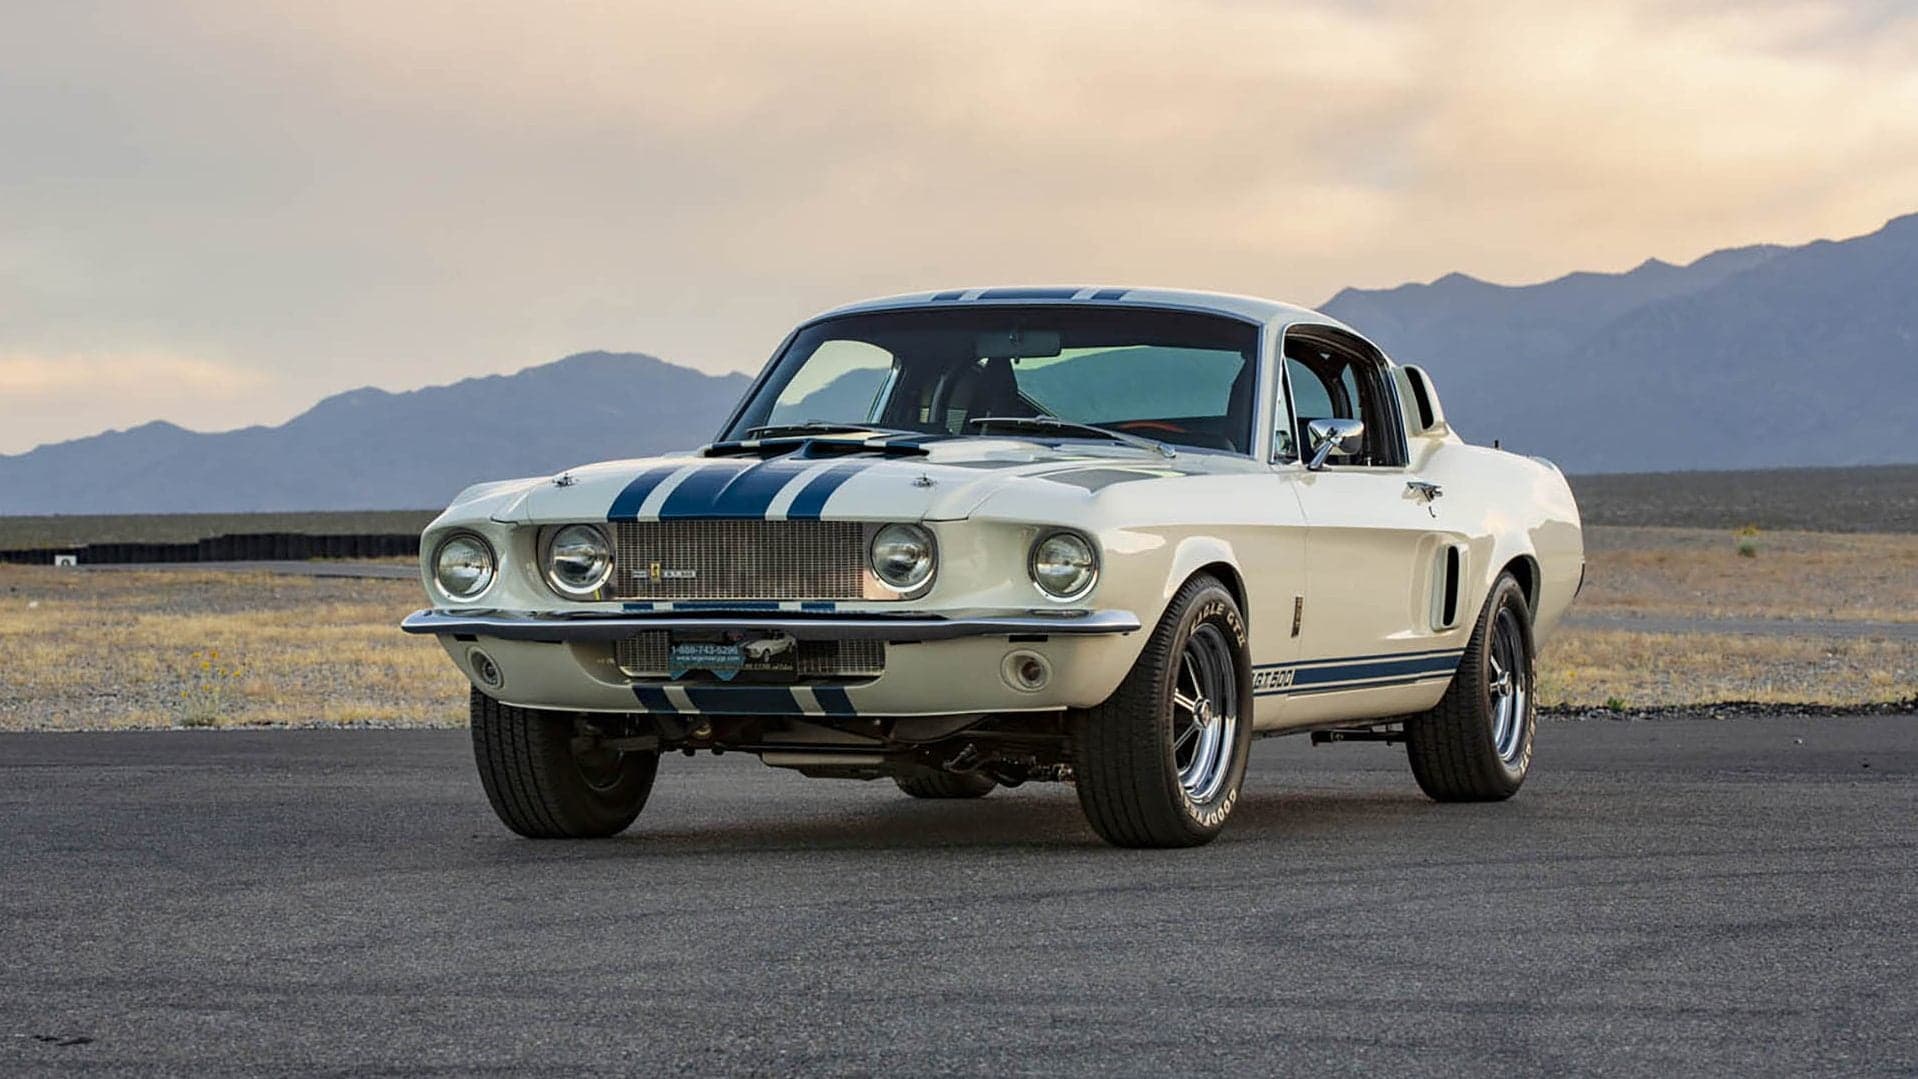 Shelby Will Build 10 More ’67 Ford Mustang GT500 Super Snakes